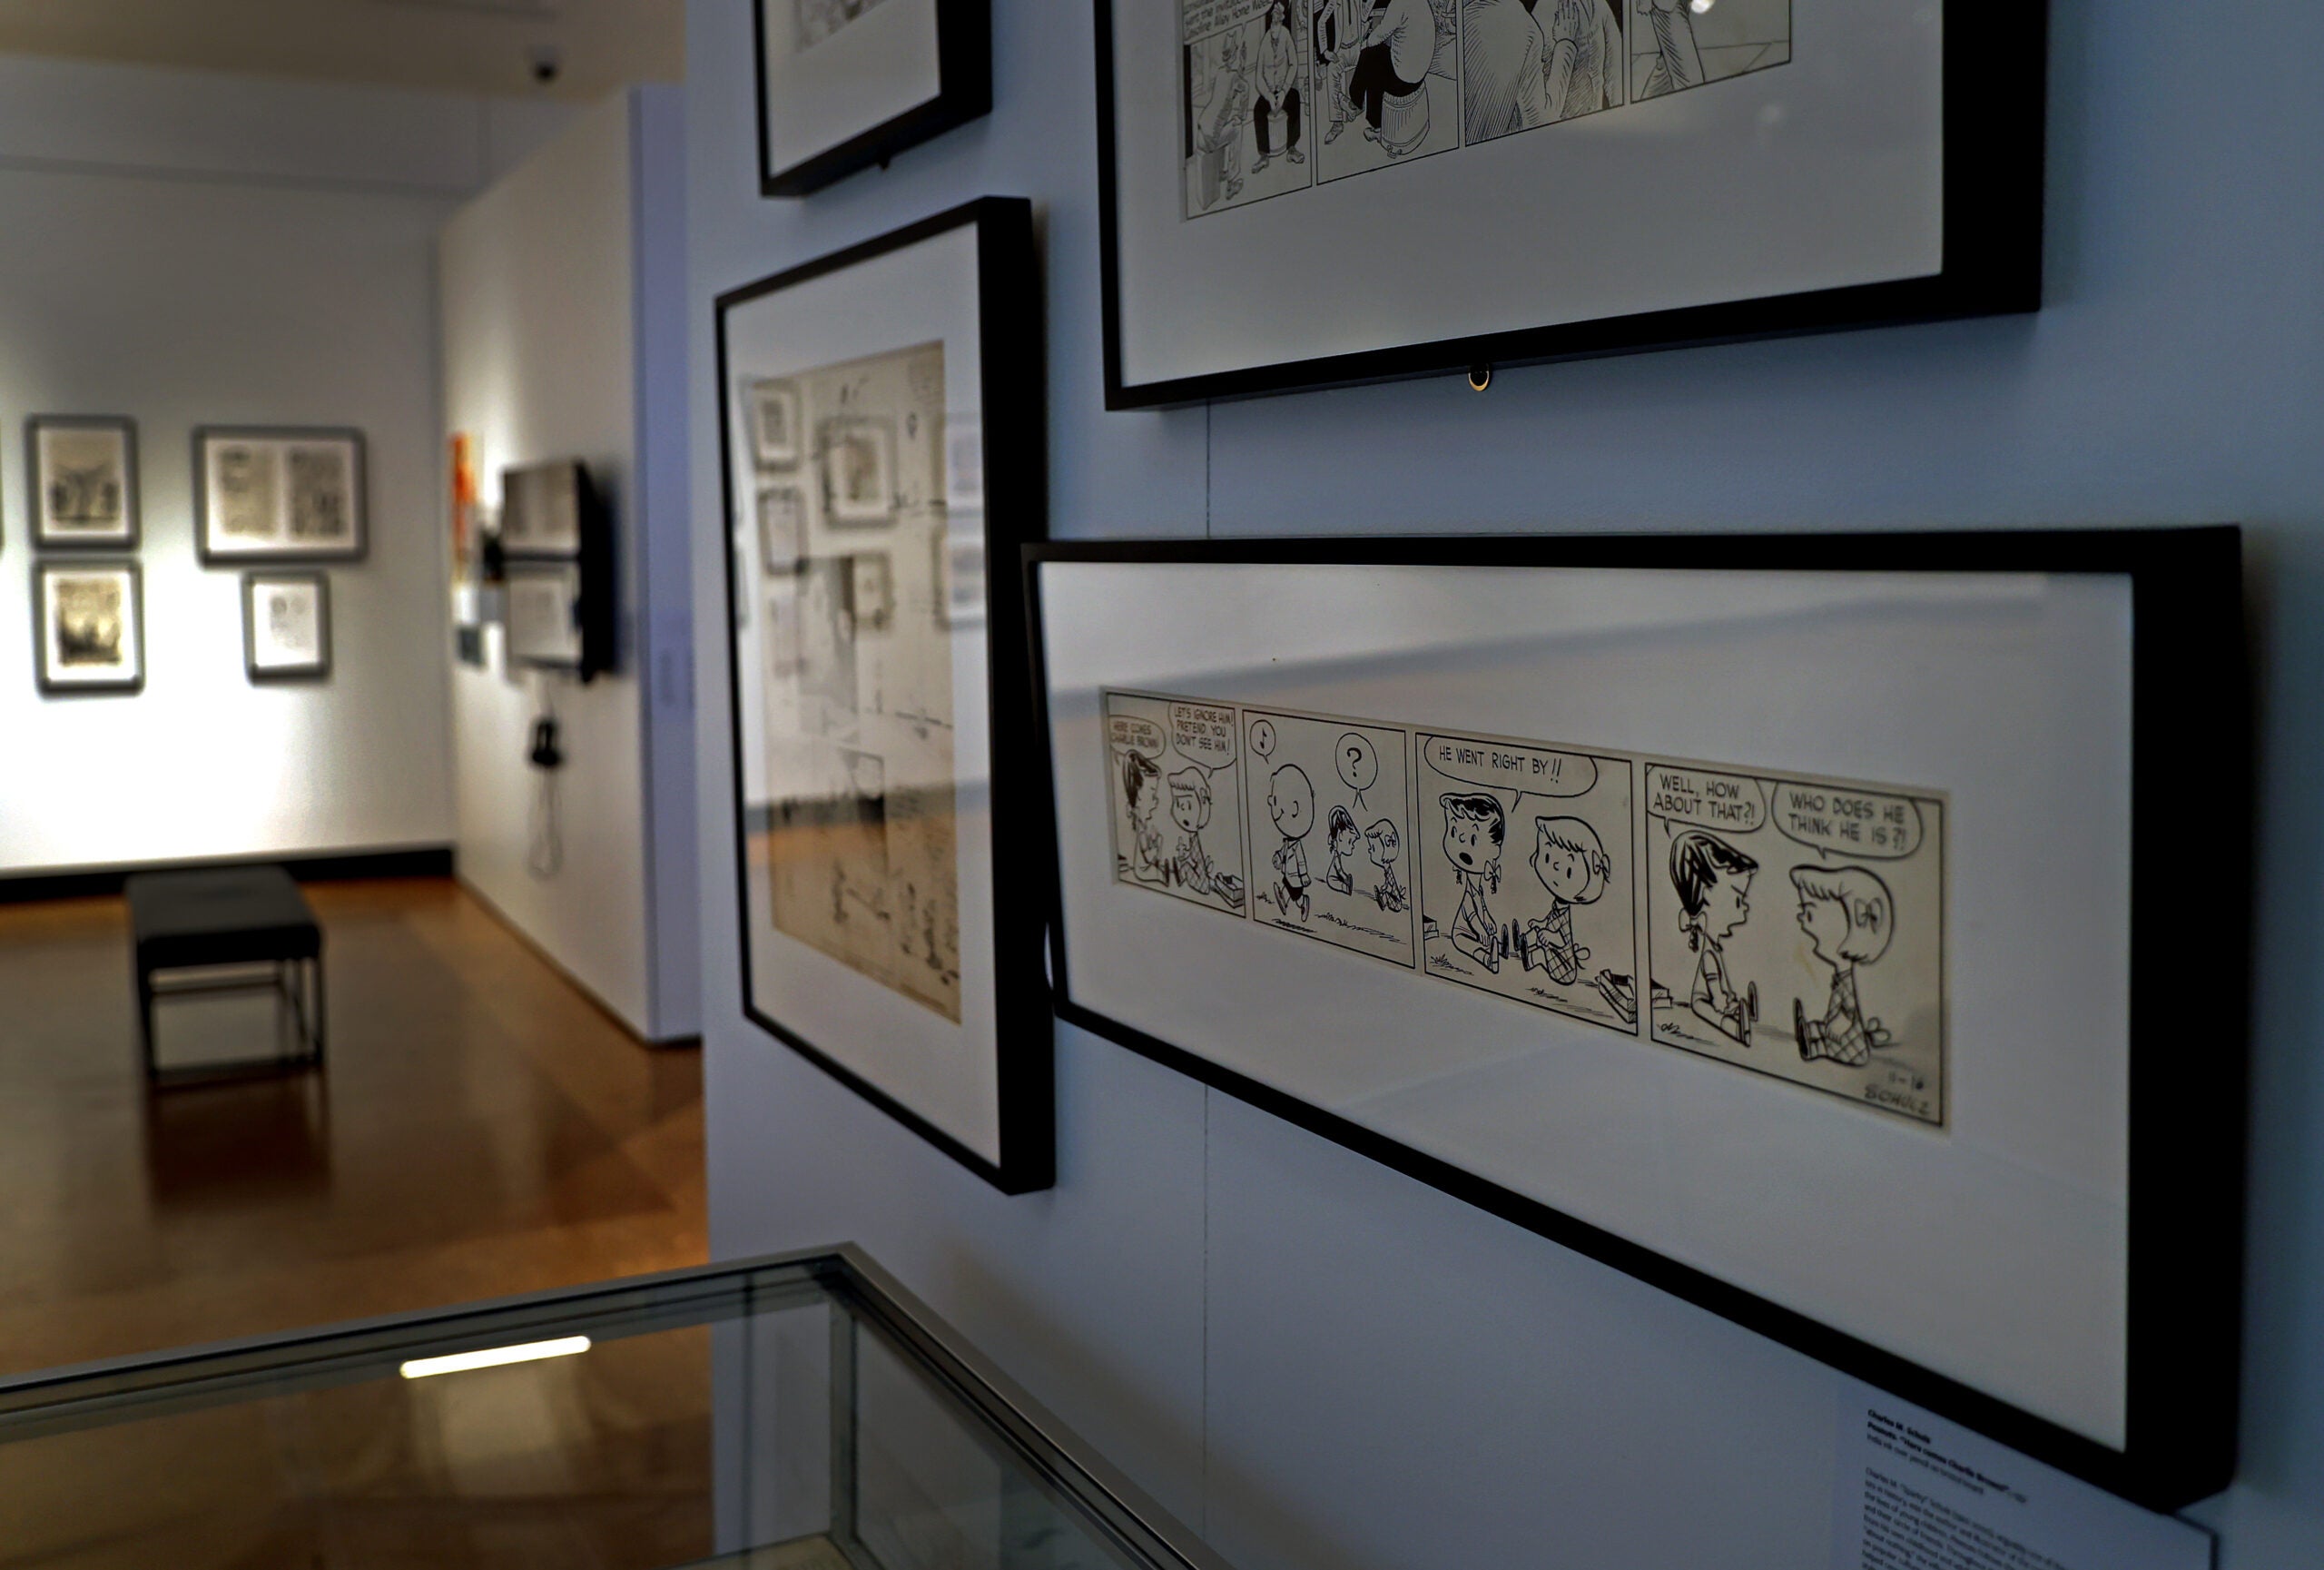 An early "Peanuts" comic strip by Charles M. Schulz hangs on a wall in the exhibition "Comics Is A Medium, Not A Genre" at Boston University